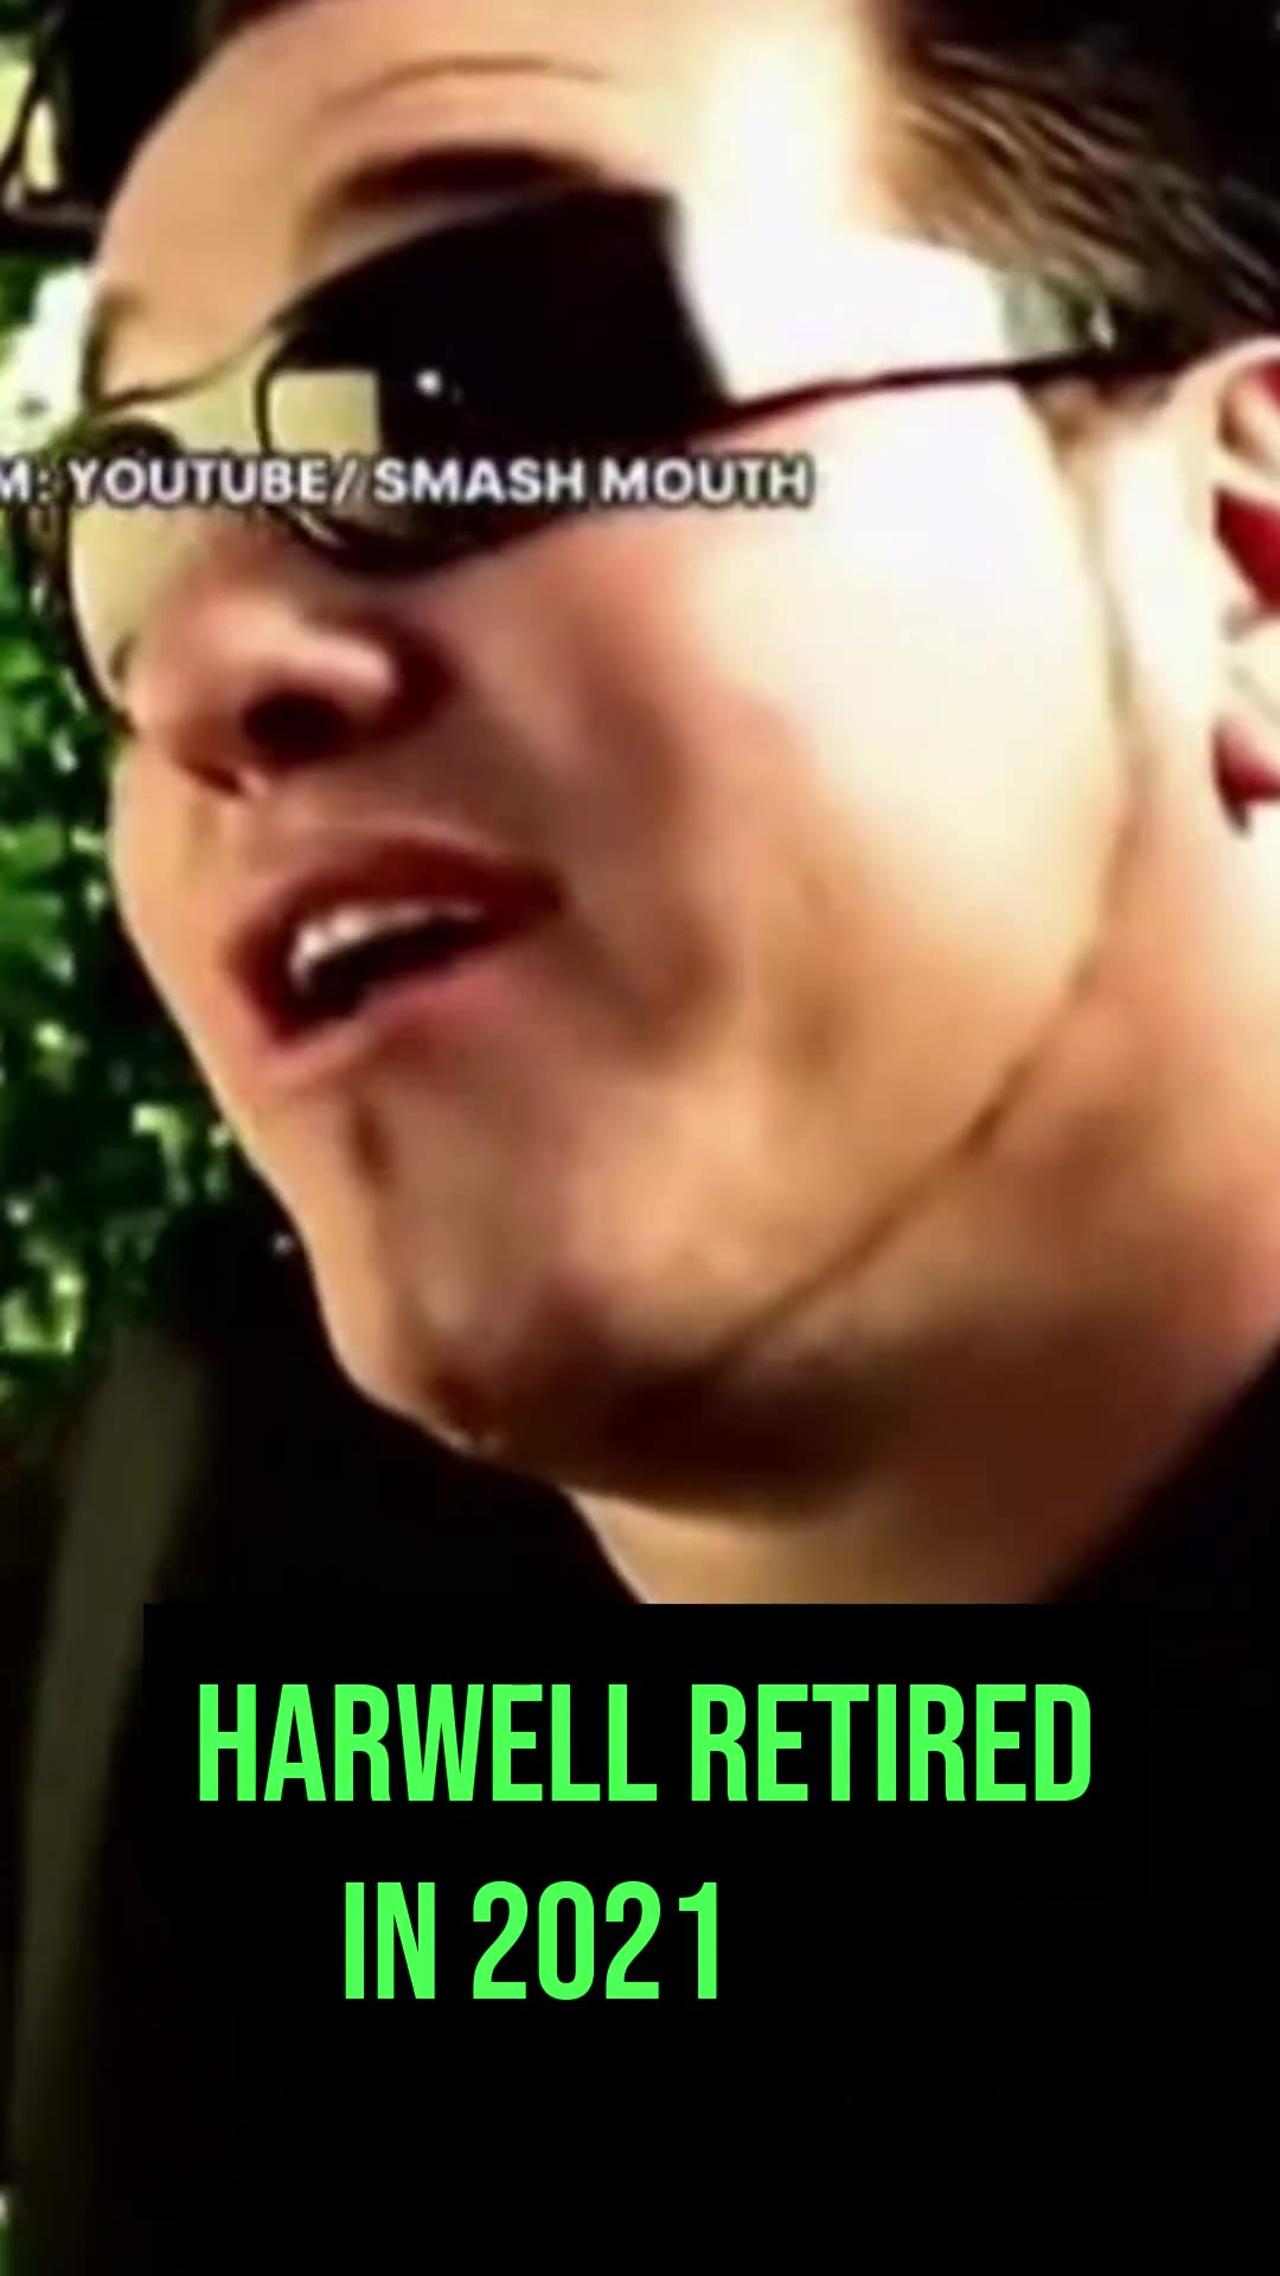 Steve Harwell of Smash Mouth Dies from this unexpected disease